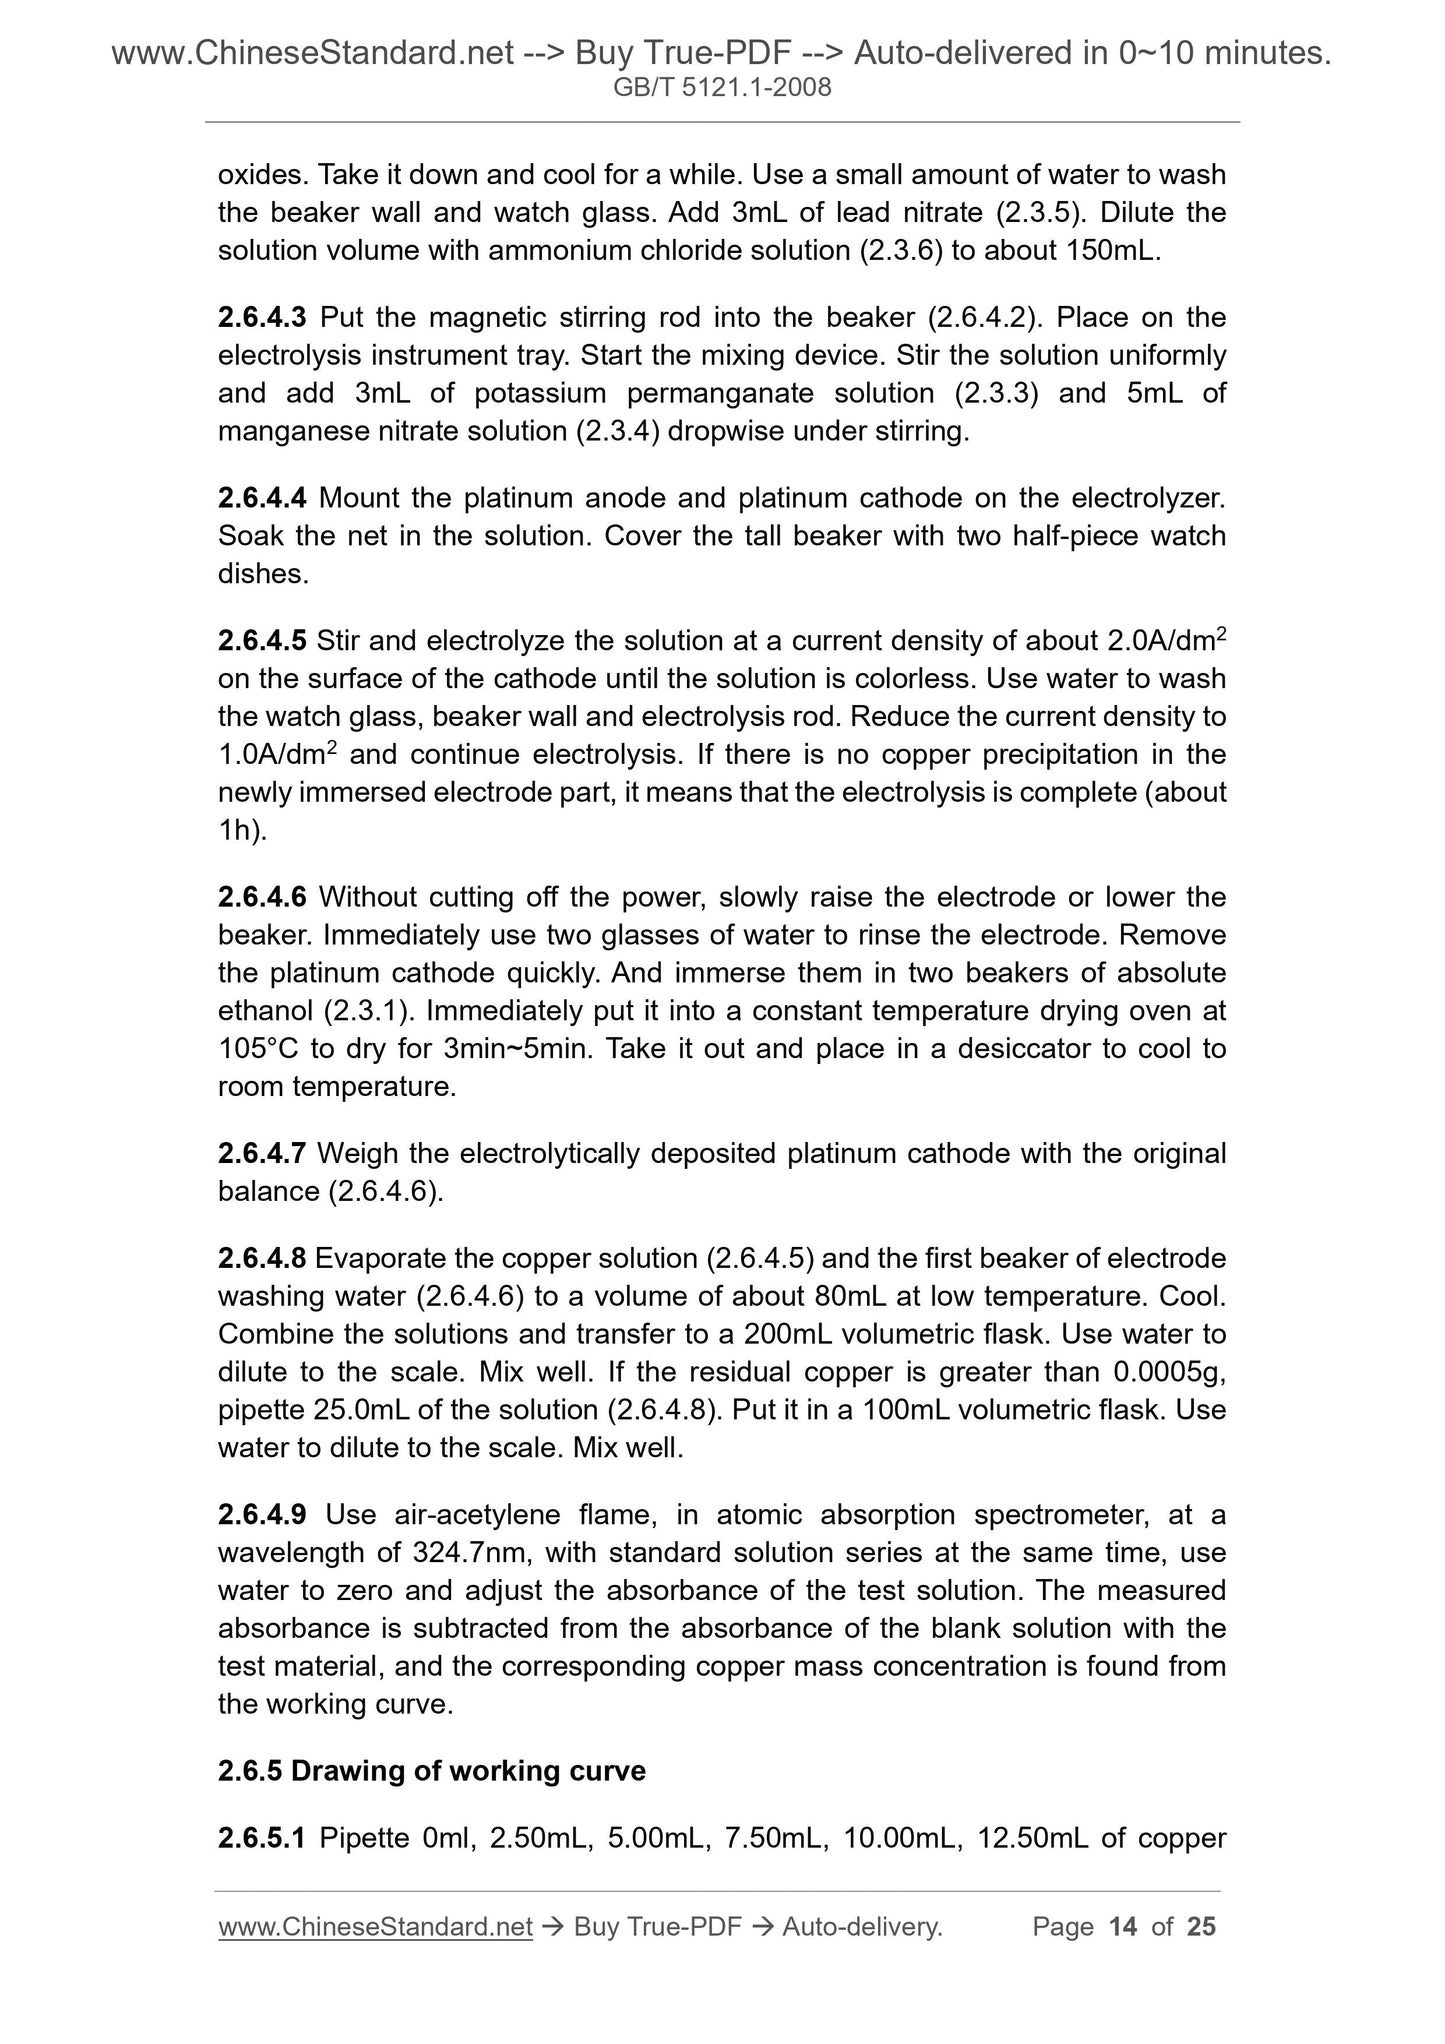 GB/T 5121.1-2008 Page 6